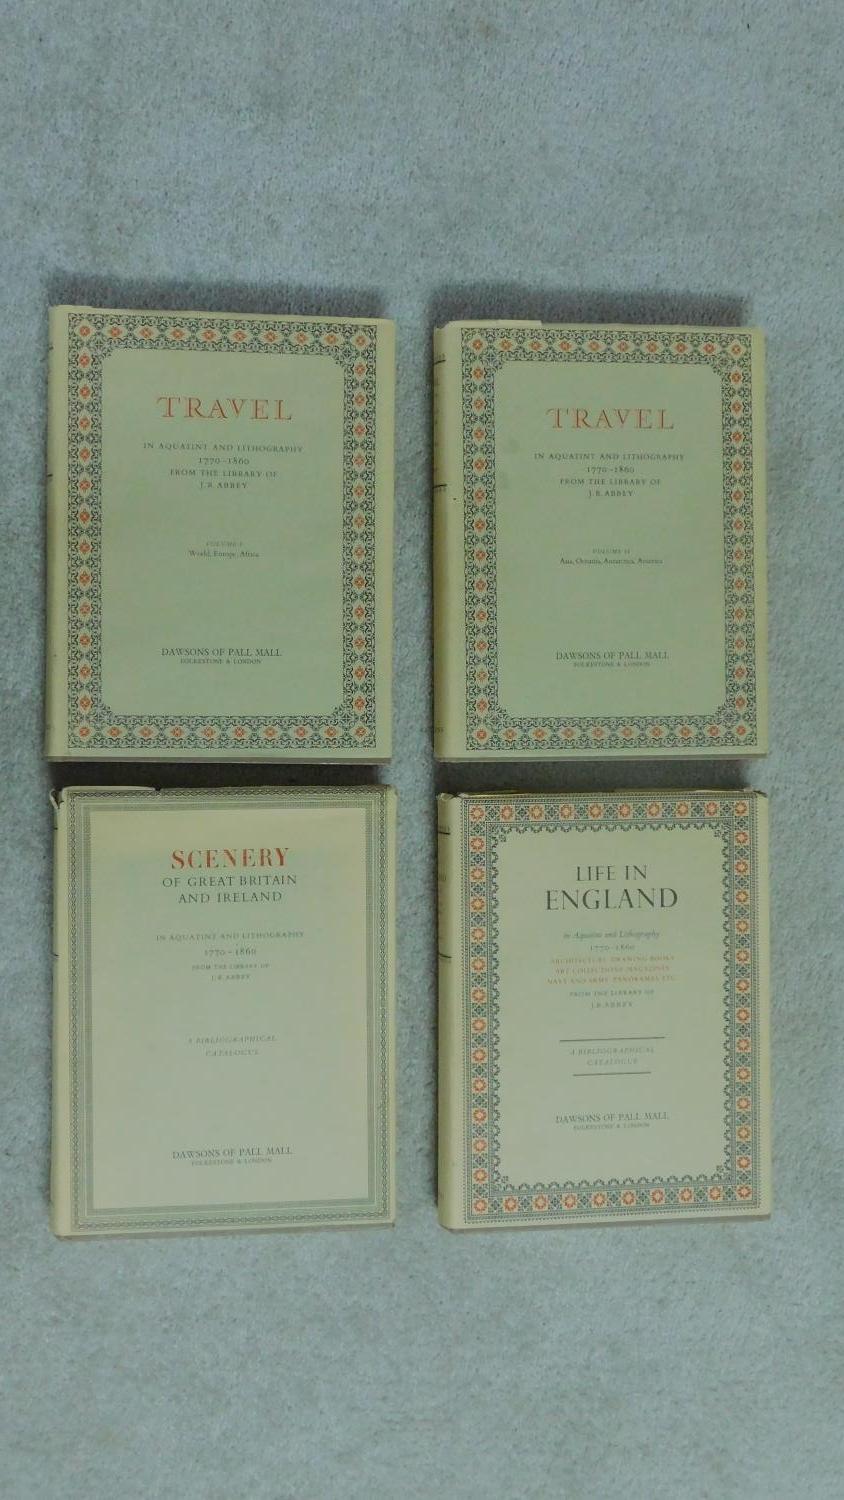 A collection of four antique books. Including Abbey (J. R.) . Travel in Aquatint and Lithography